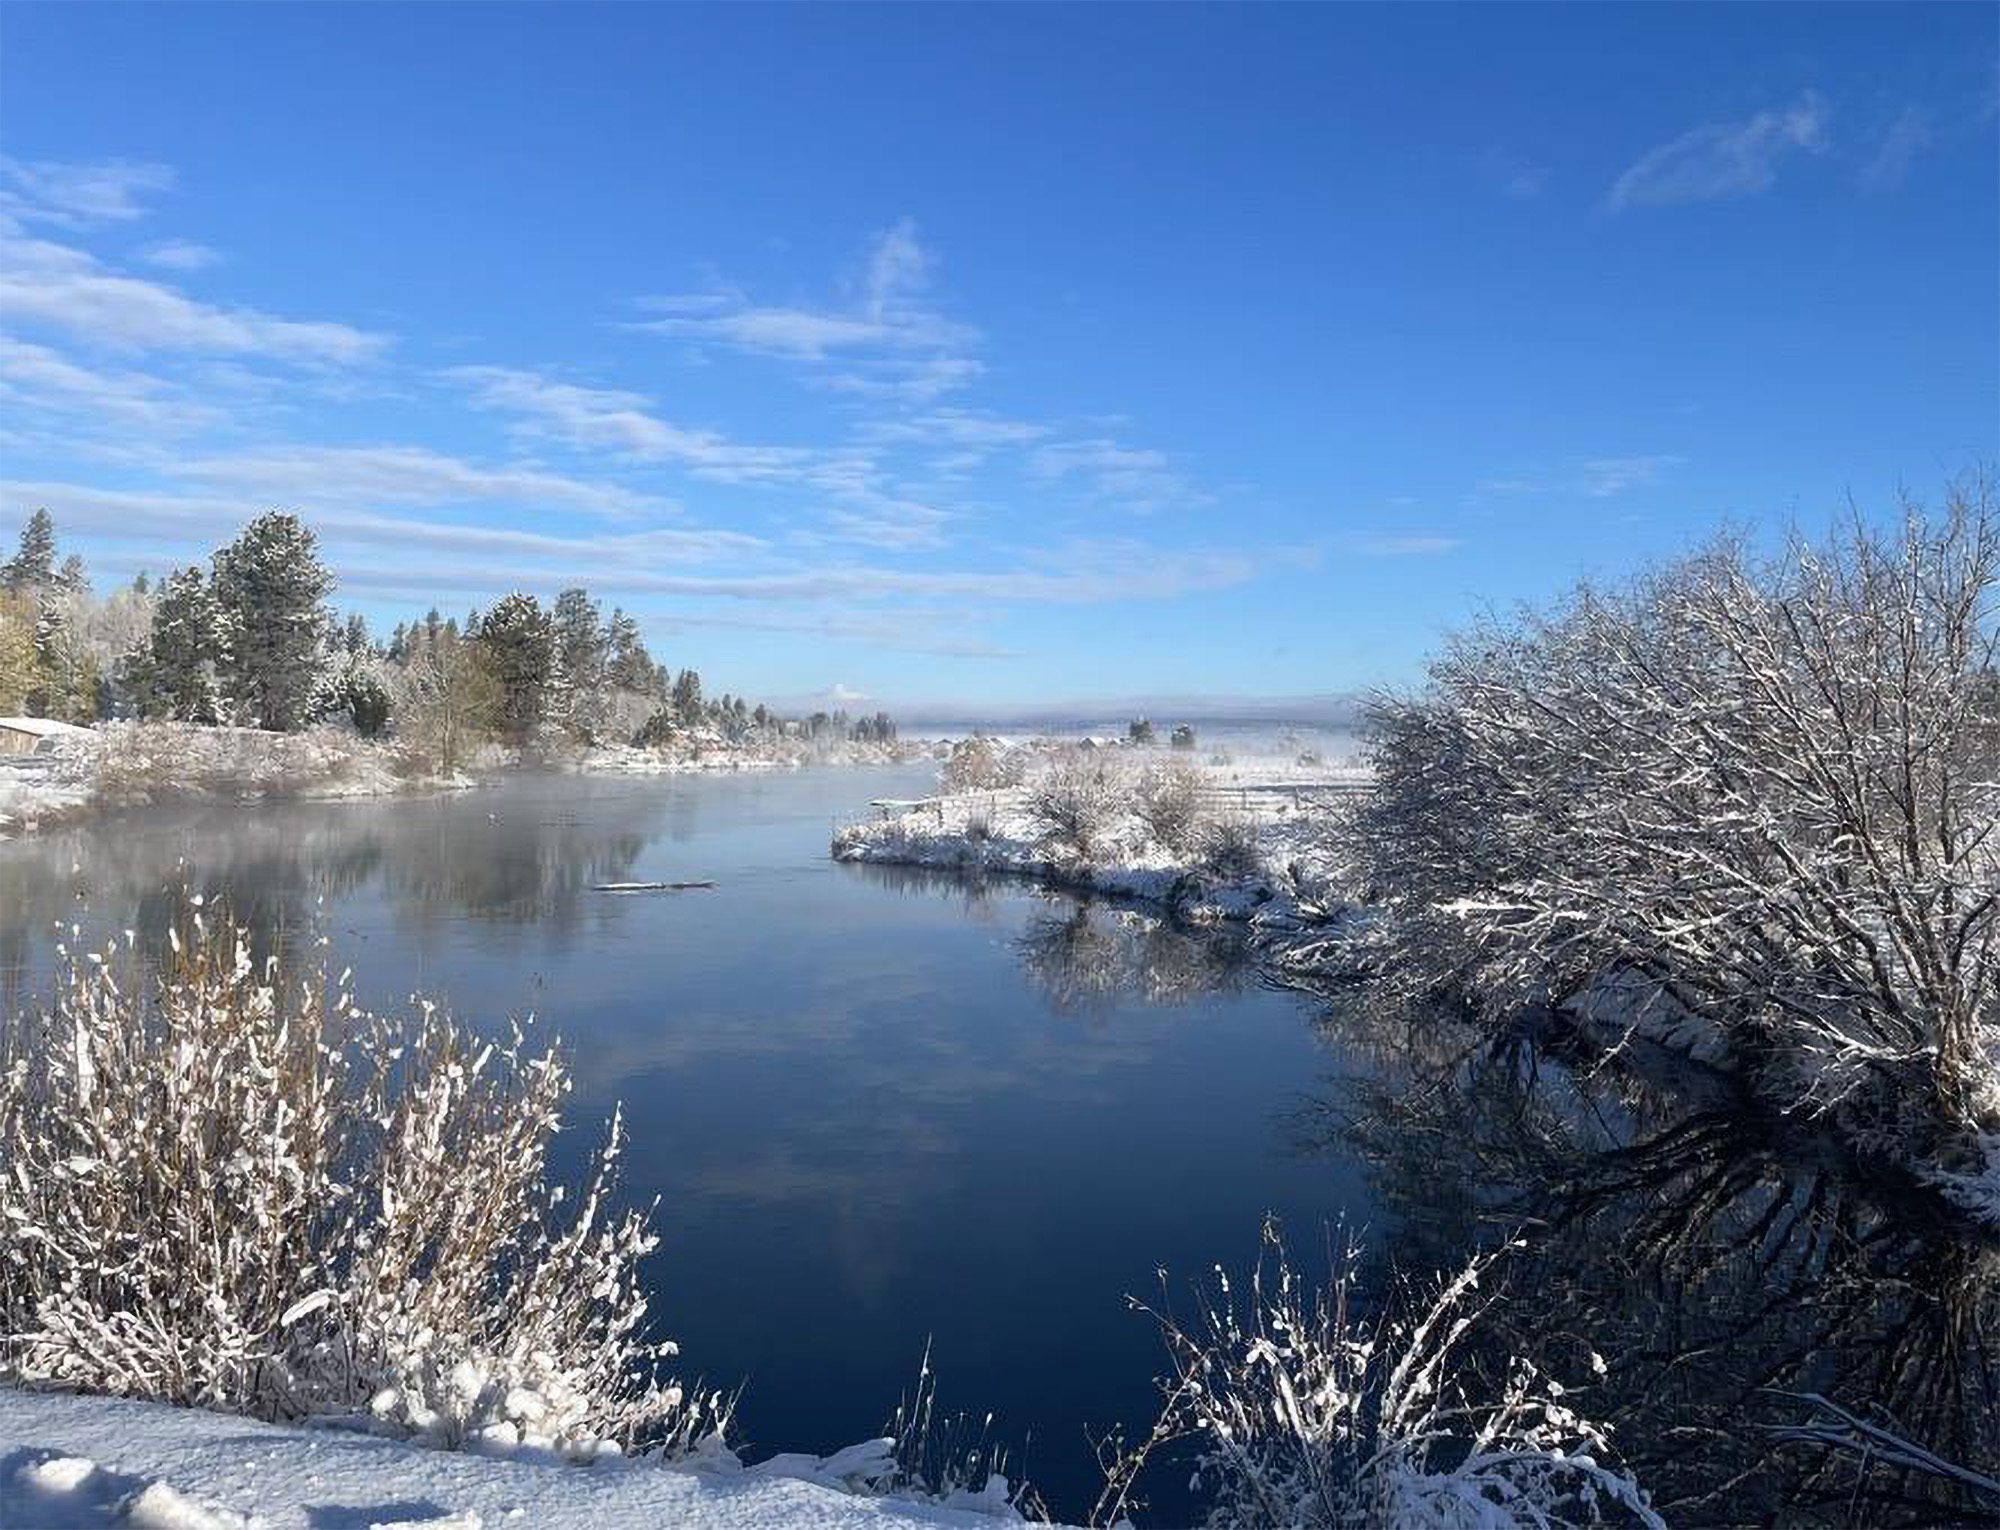 Wintery stock photo from the Bureau of Reclamation